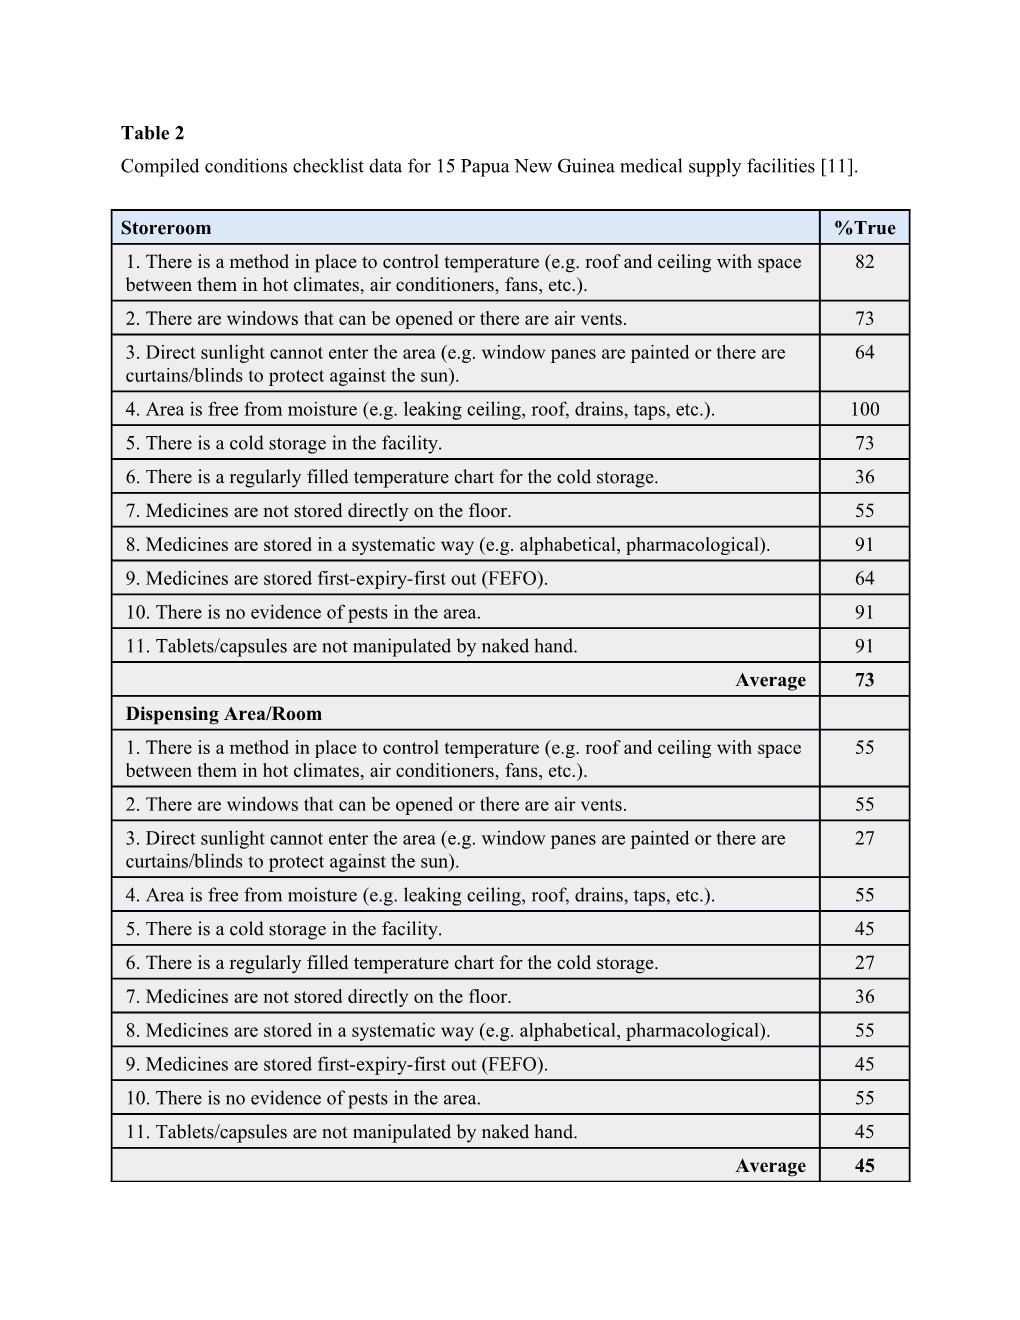 Compiled Conditions Checklist Data for 15 Papua New Guinea Medical Supply Facilities 11